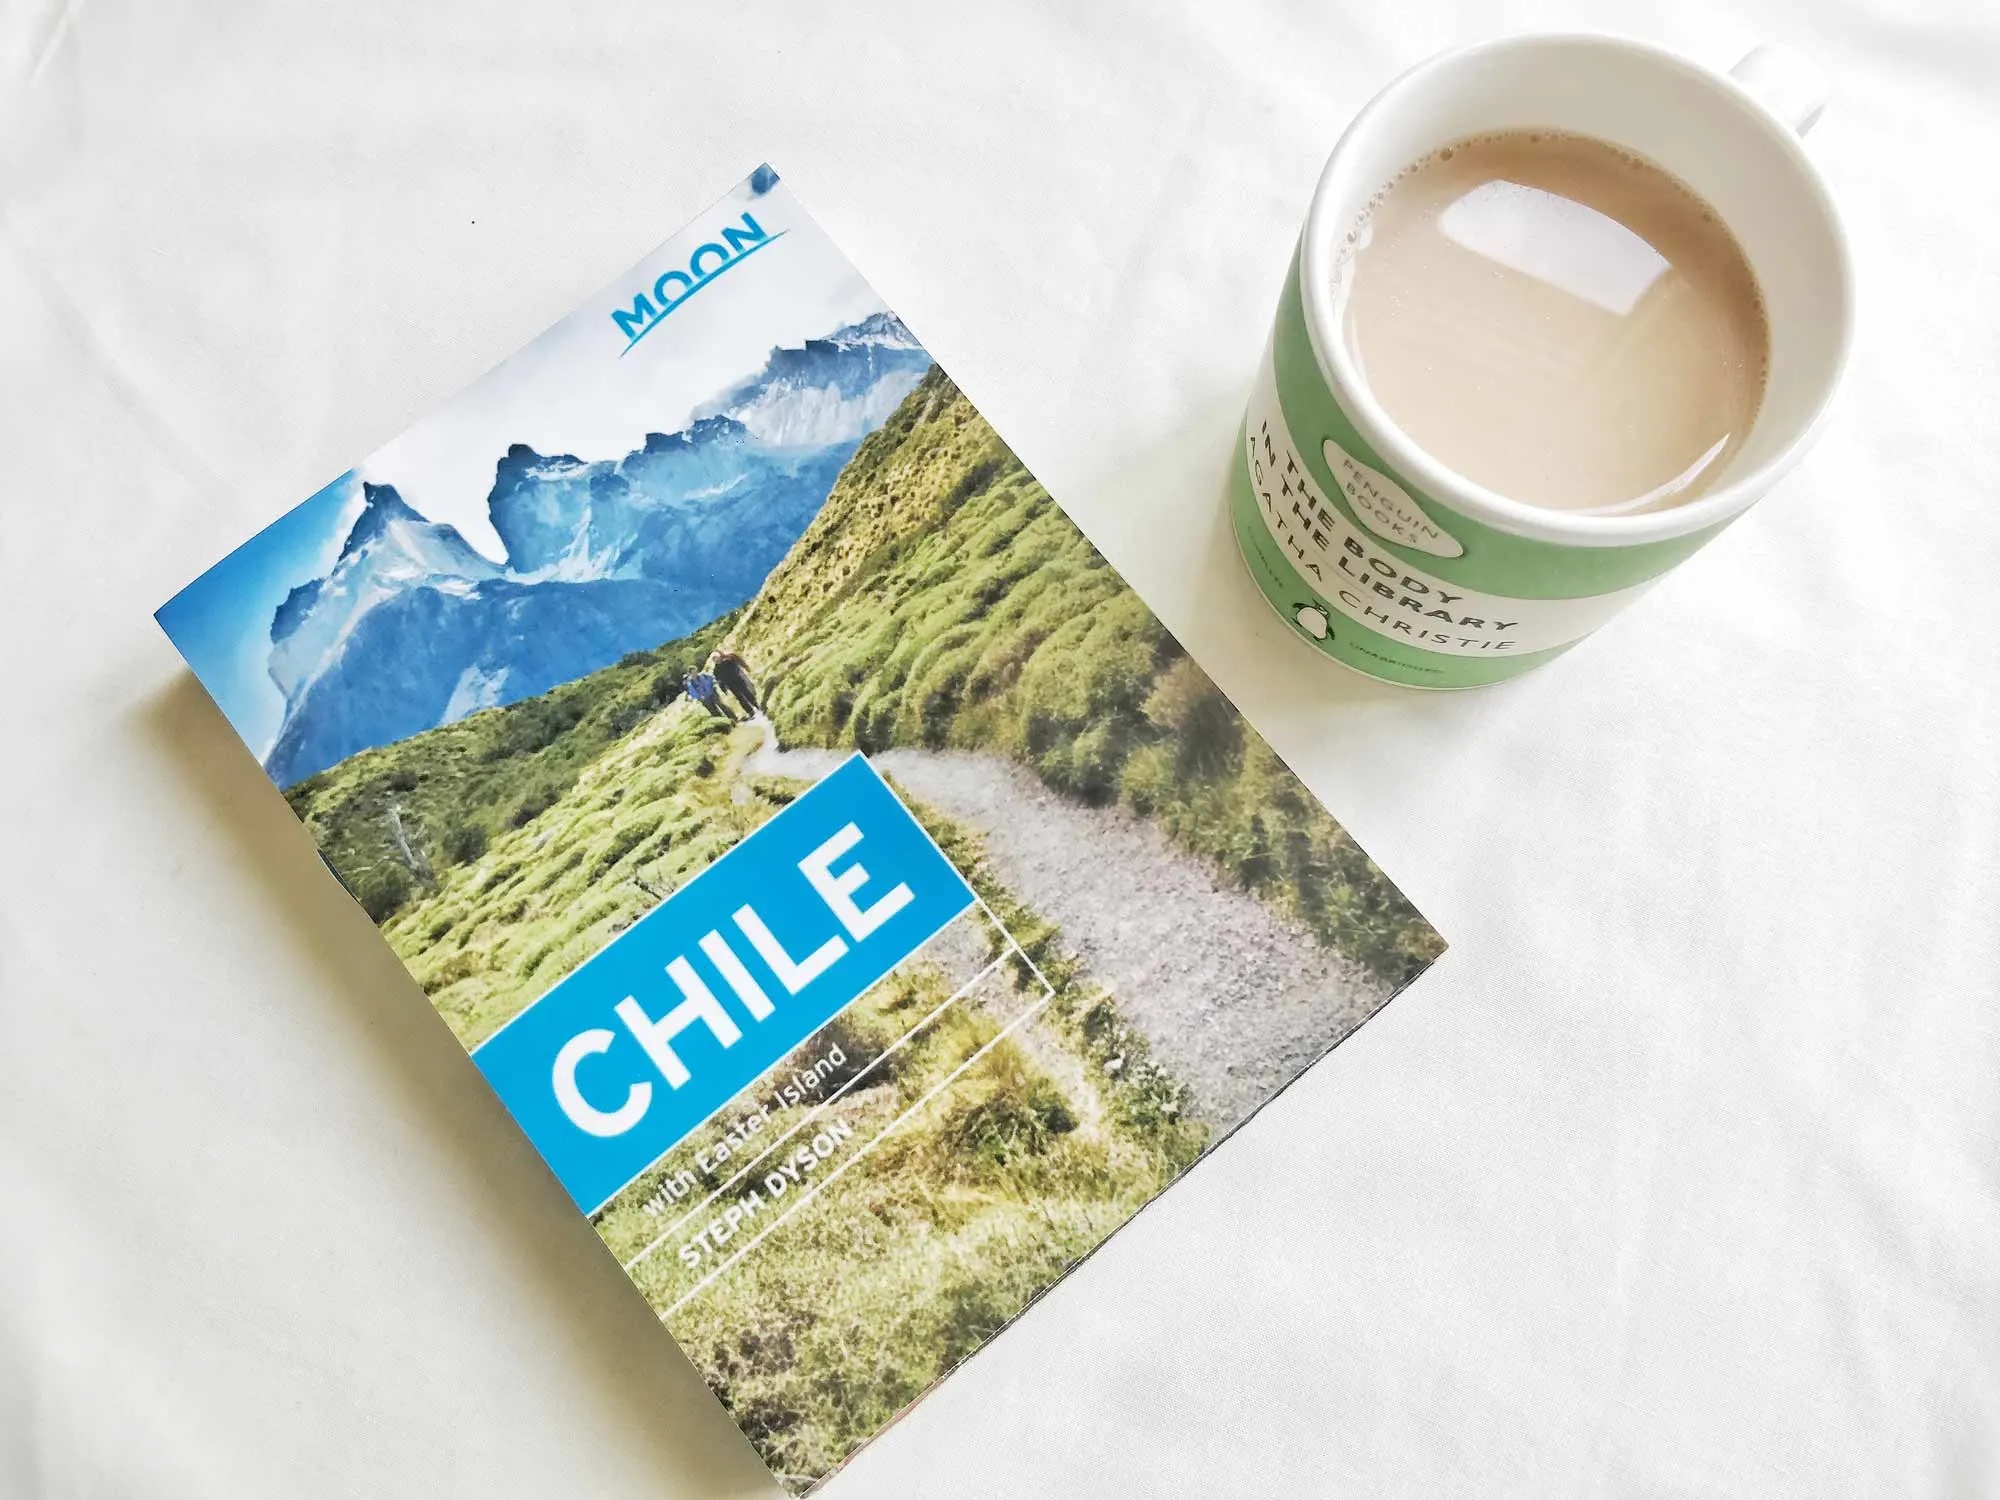 Moon Chile guidebook